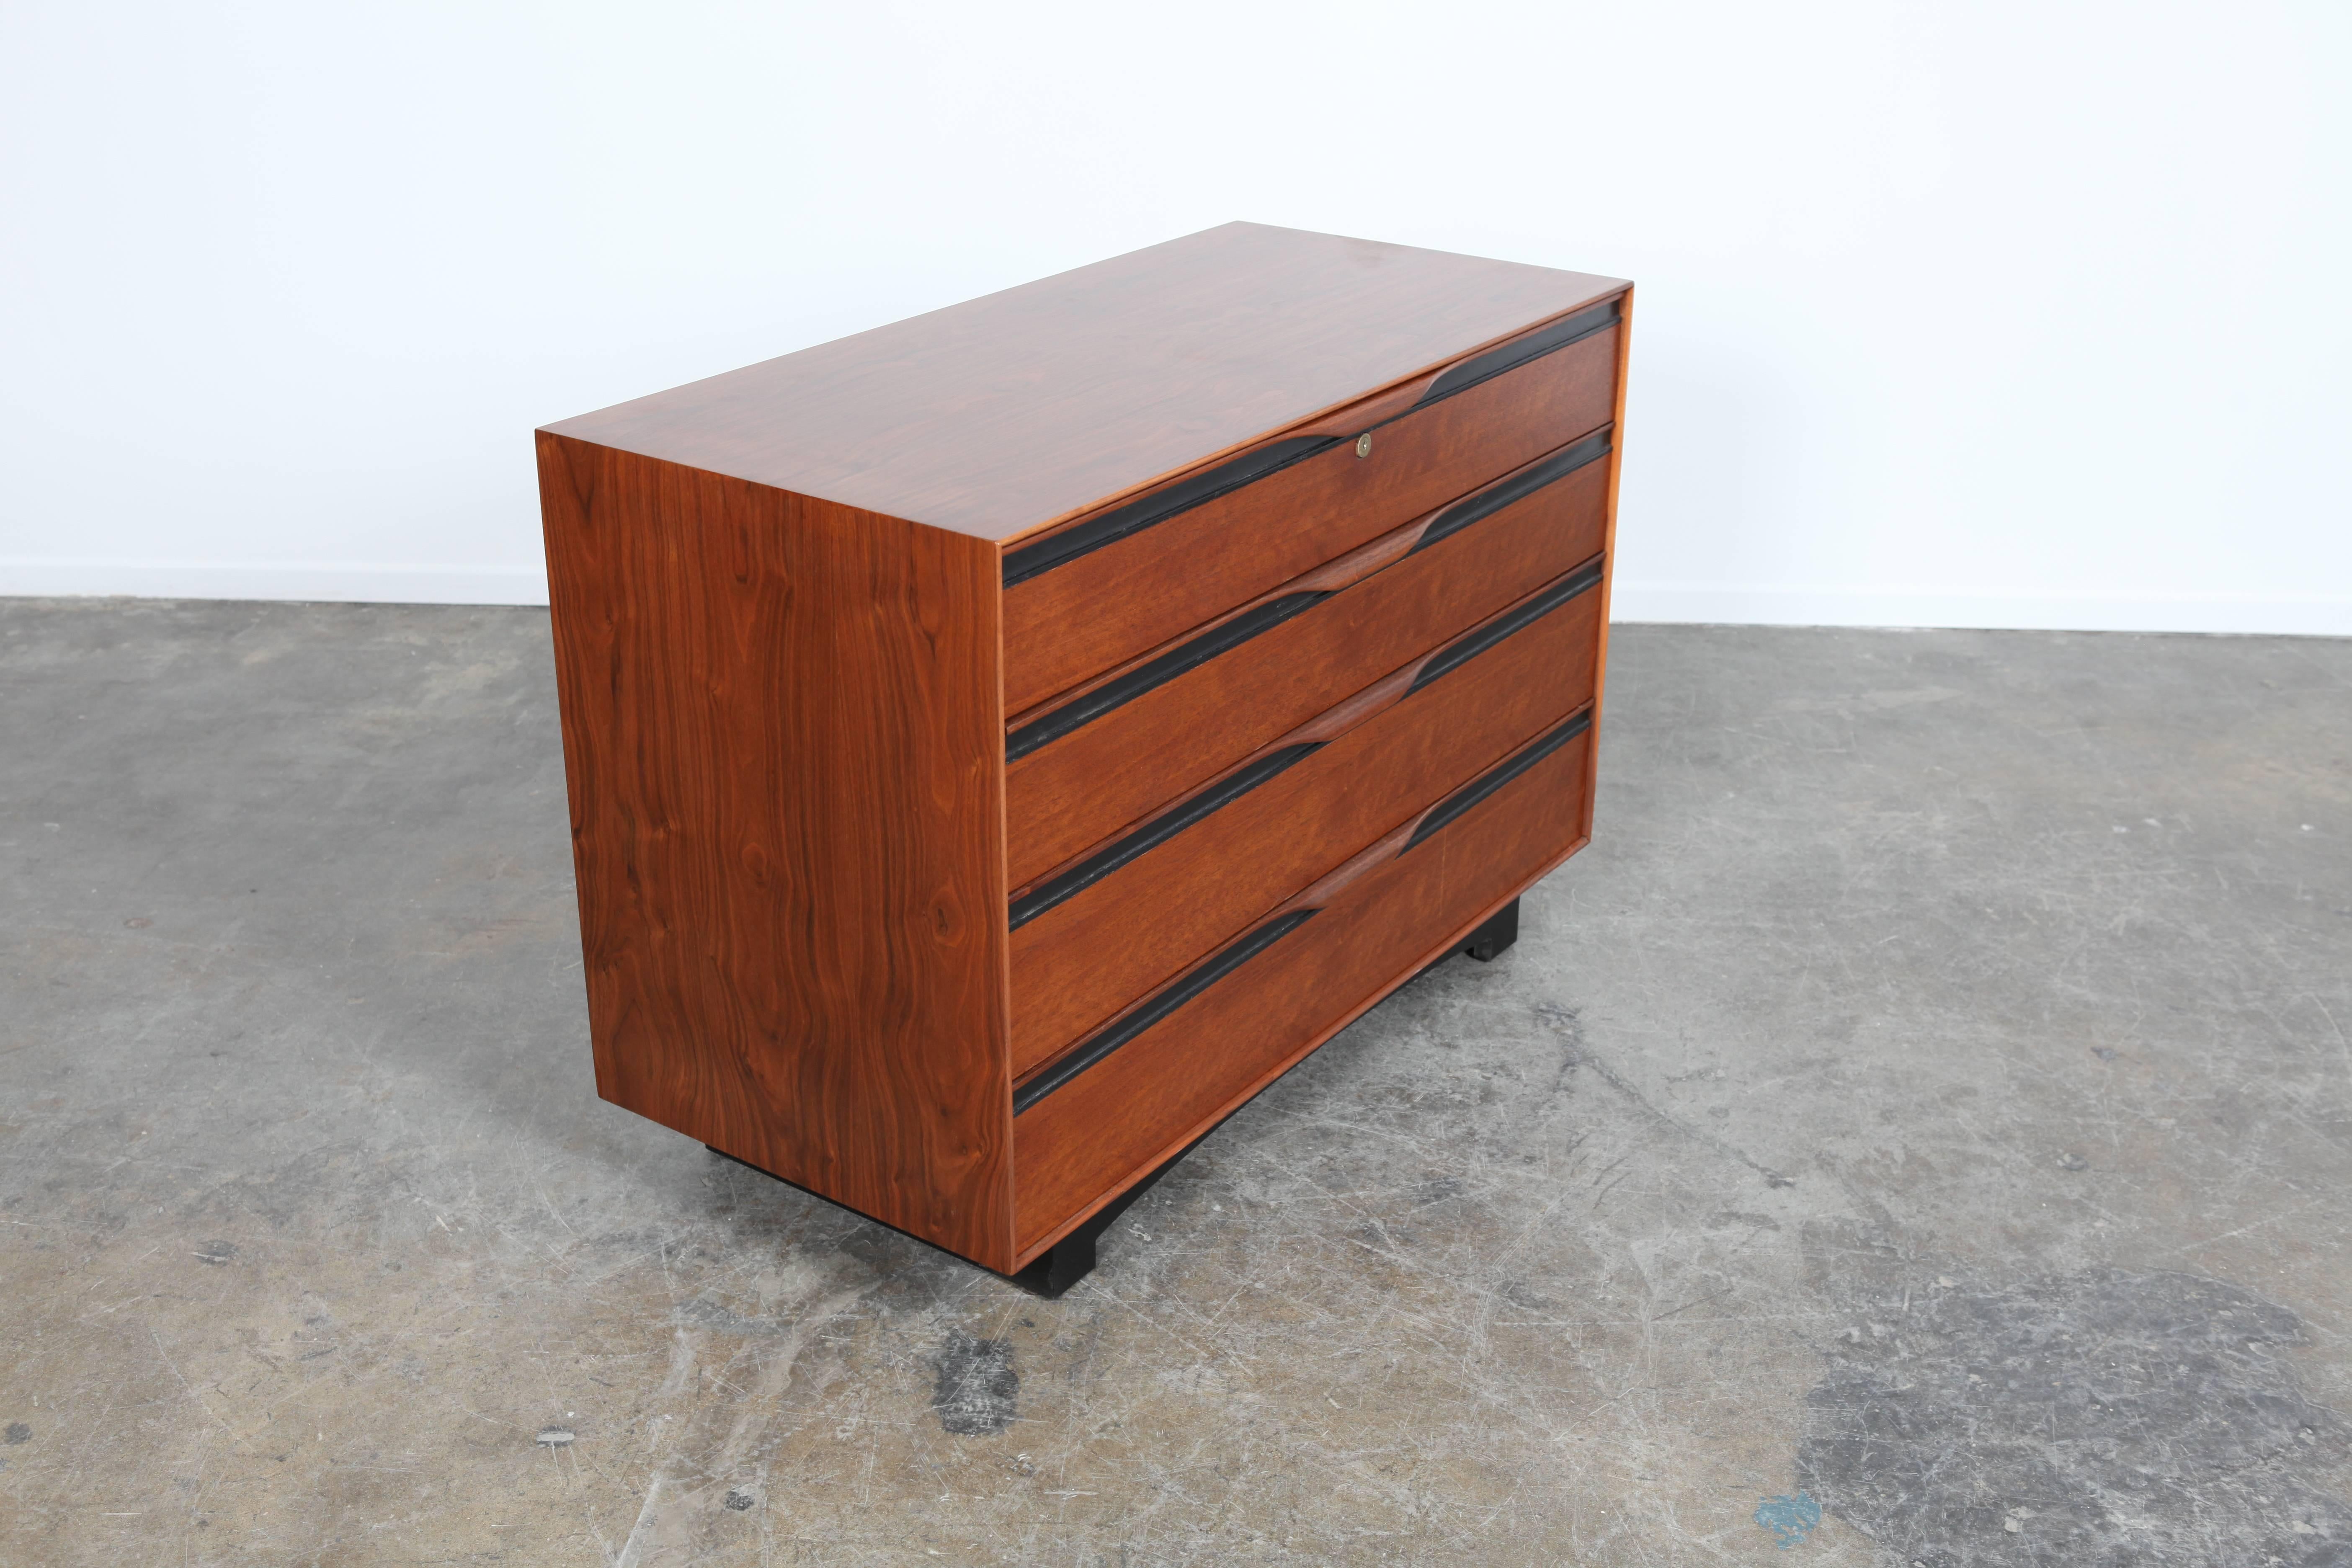 Walnut four-drawer dresser with black accents, American made, designed by John Kapel for Glenn of California.